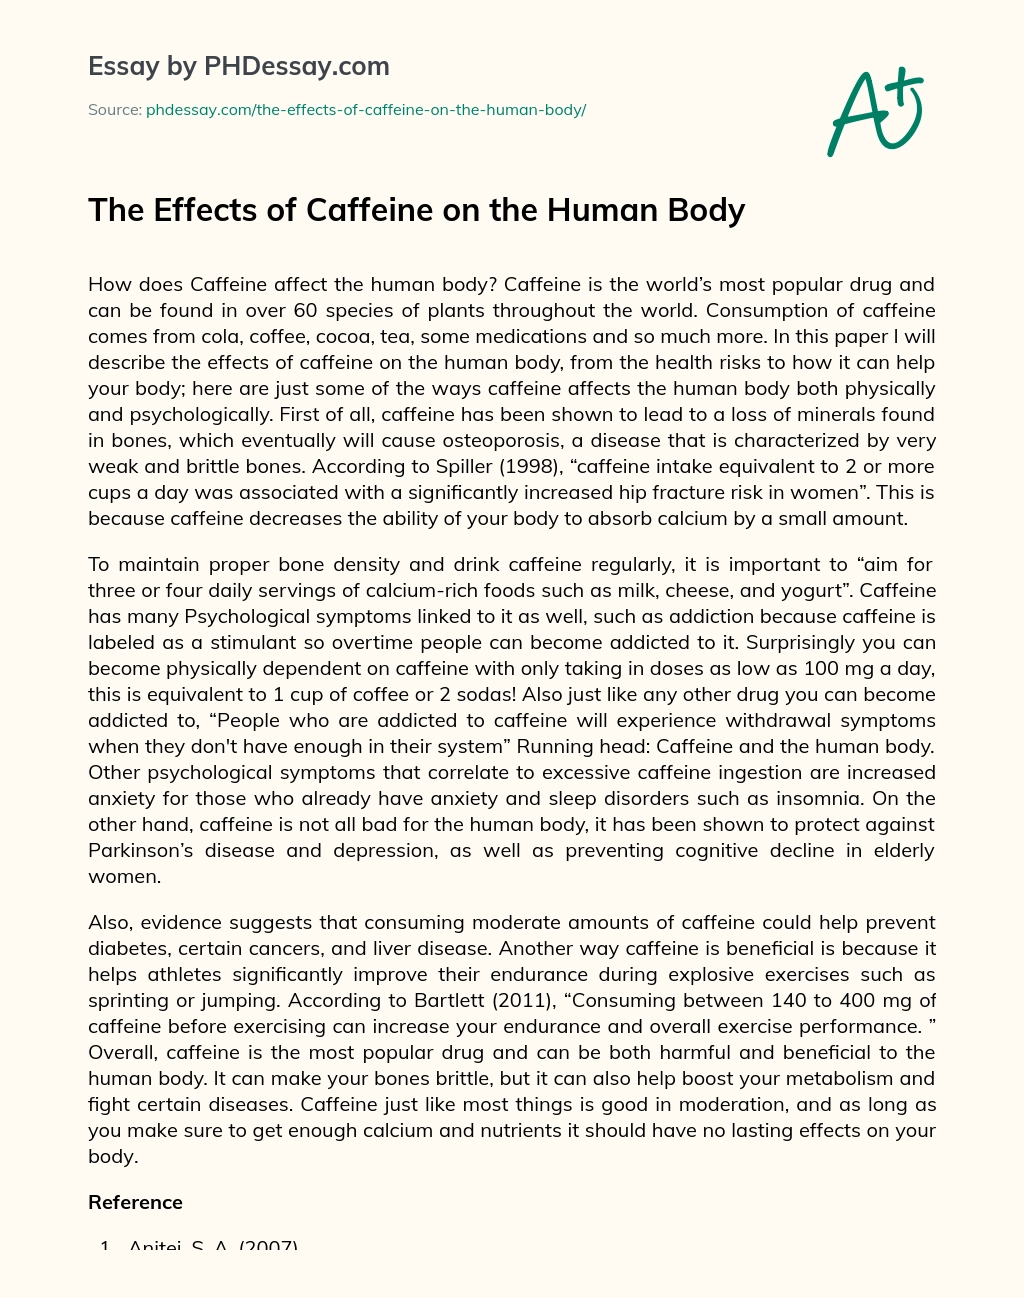 The Effects of Caffeine on the Human Body essay